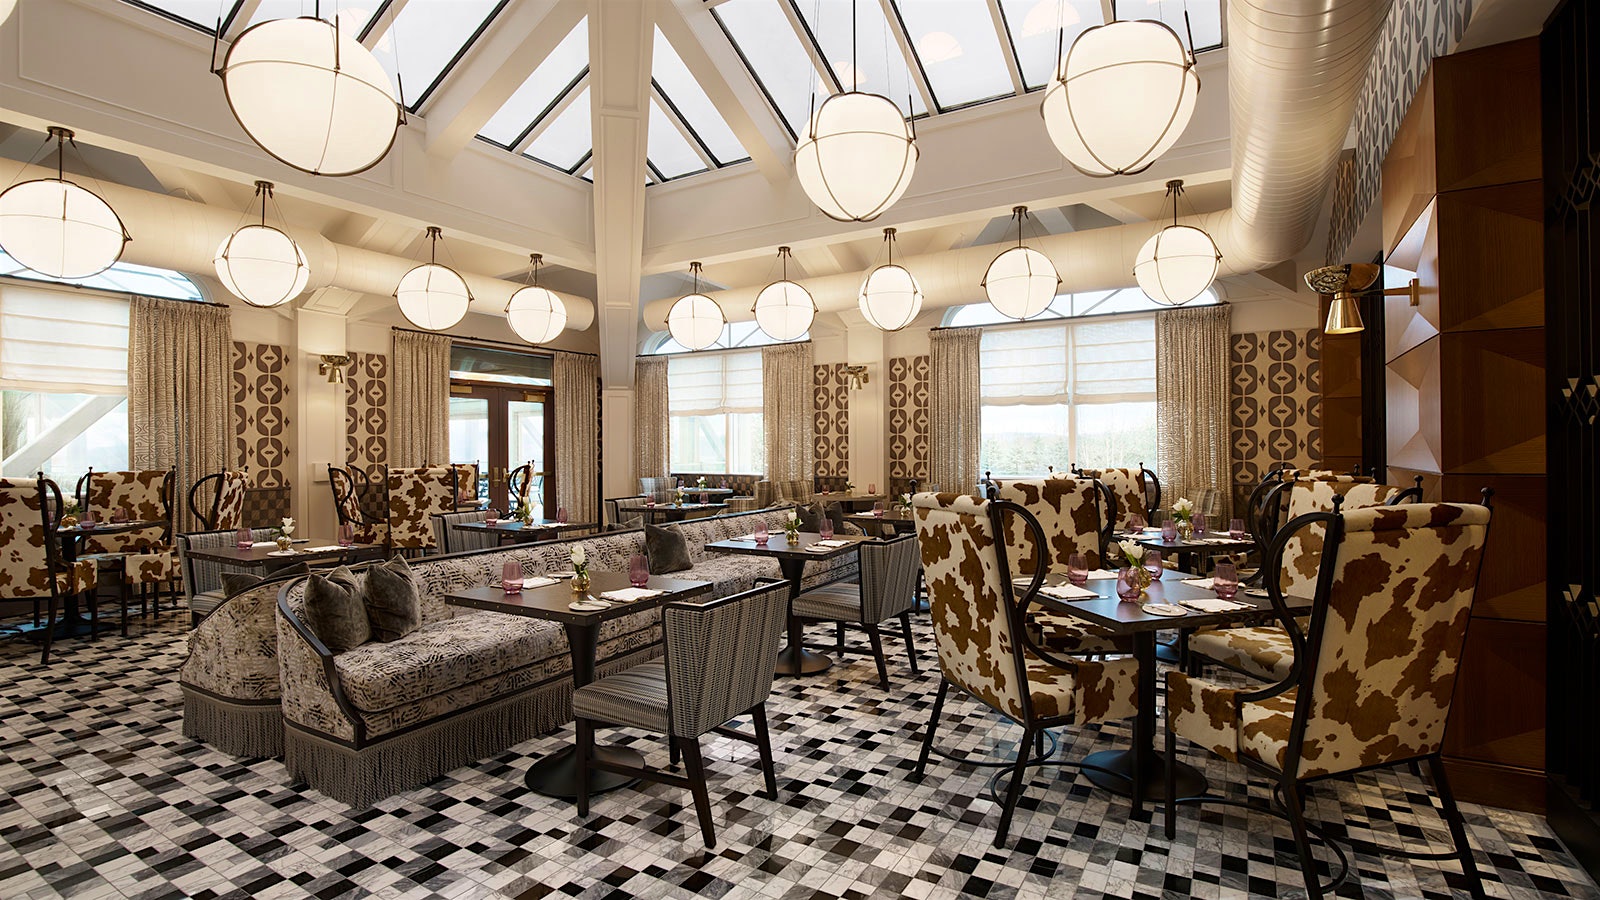  A dining room at Nemacolin's Fawn and Fable, where there are spherical lighting fixtures and cow-printed chairs